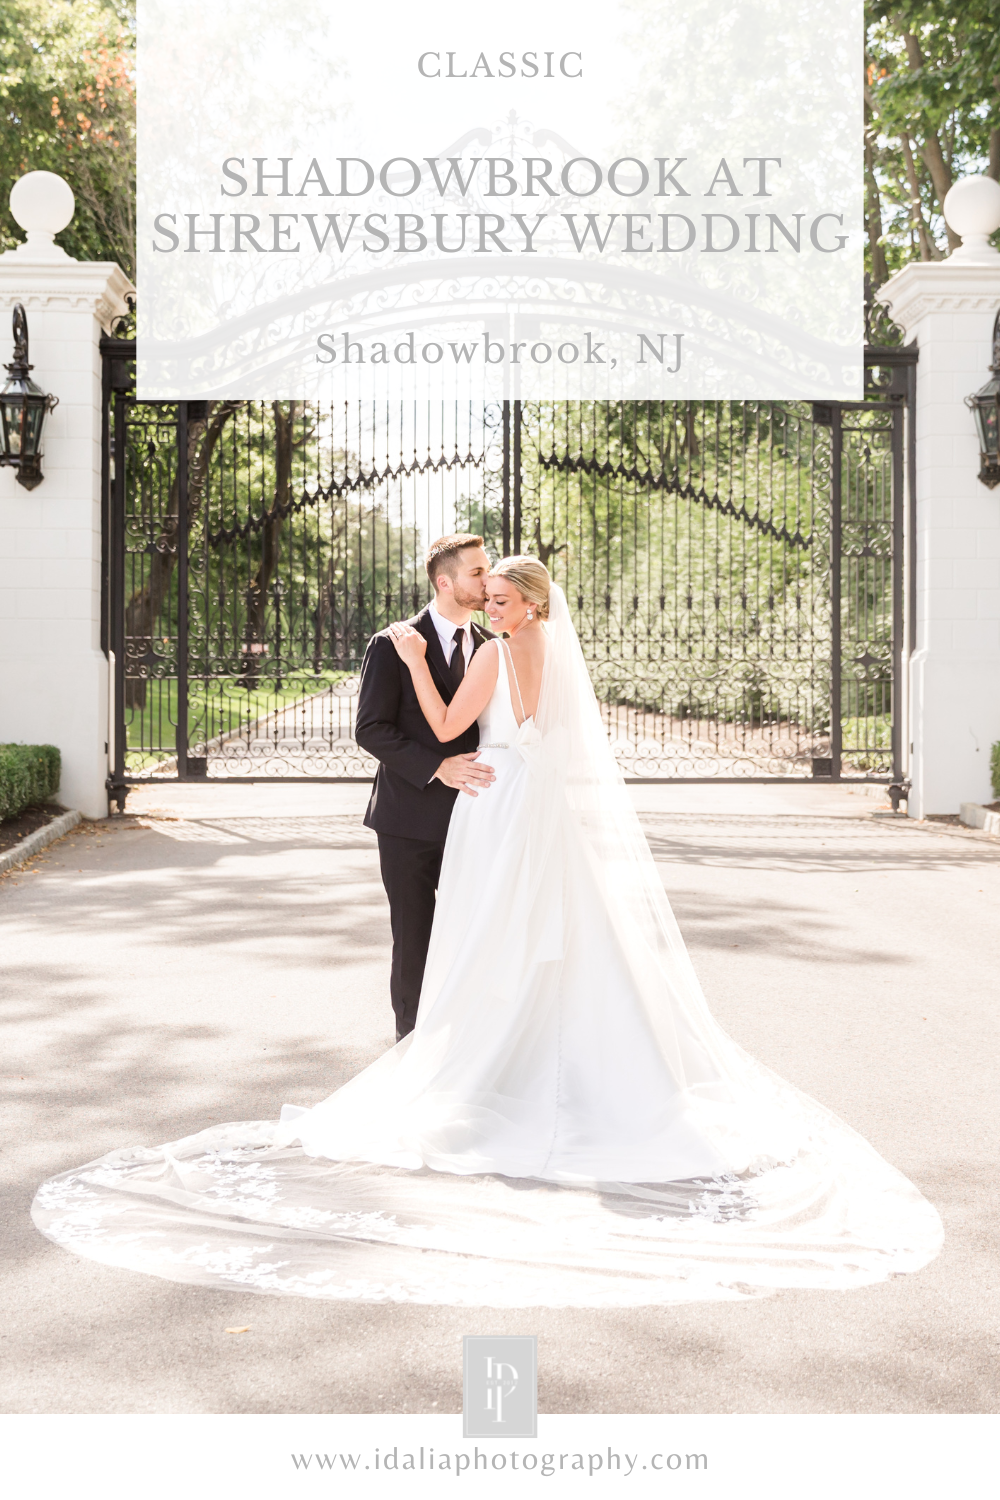 classic Shadowbrook at Shrewsbury wedding in New Jersey photographed by Idalia Photography